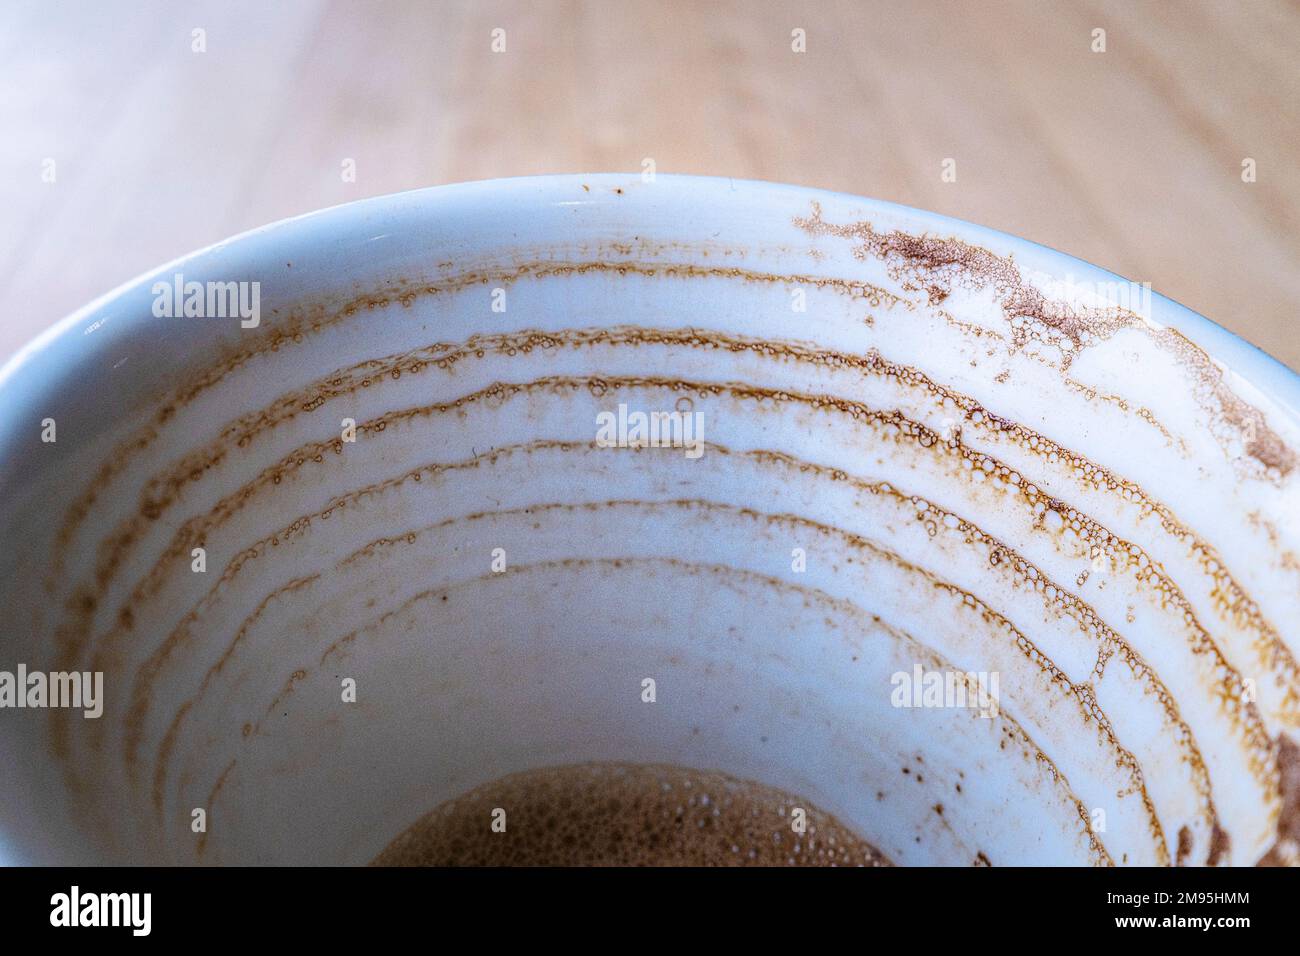 A close uo view of dried coffee rings on the inside of a cup. Stock Photo